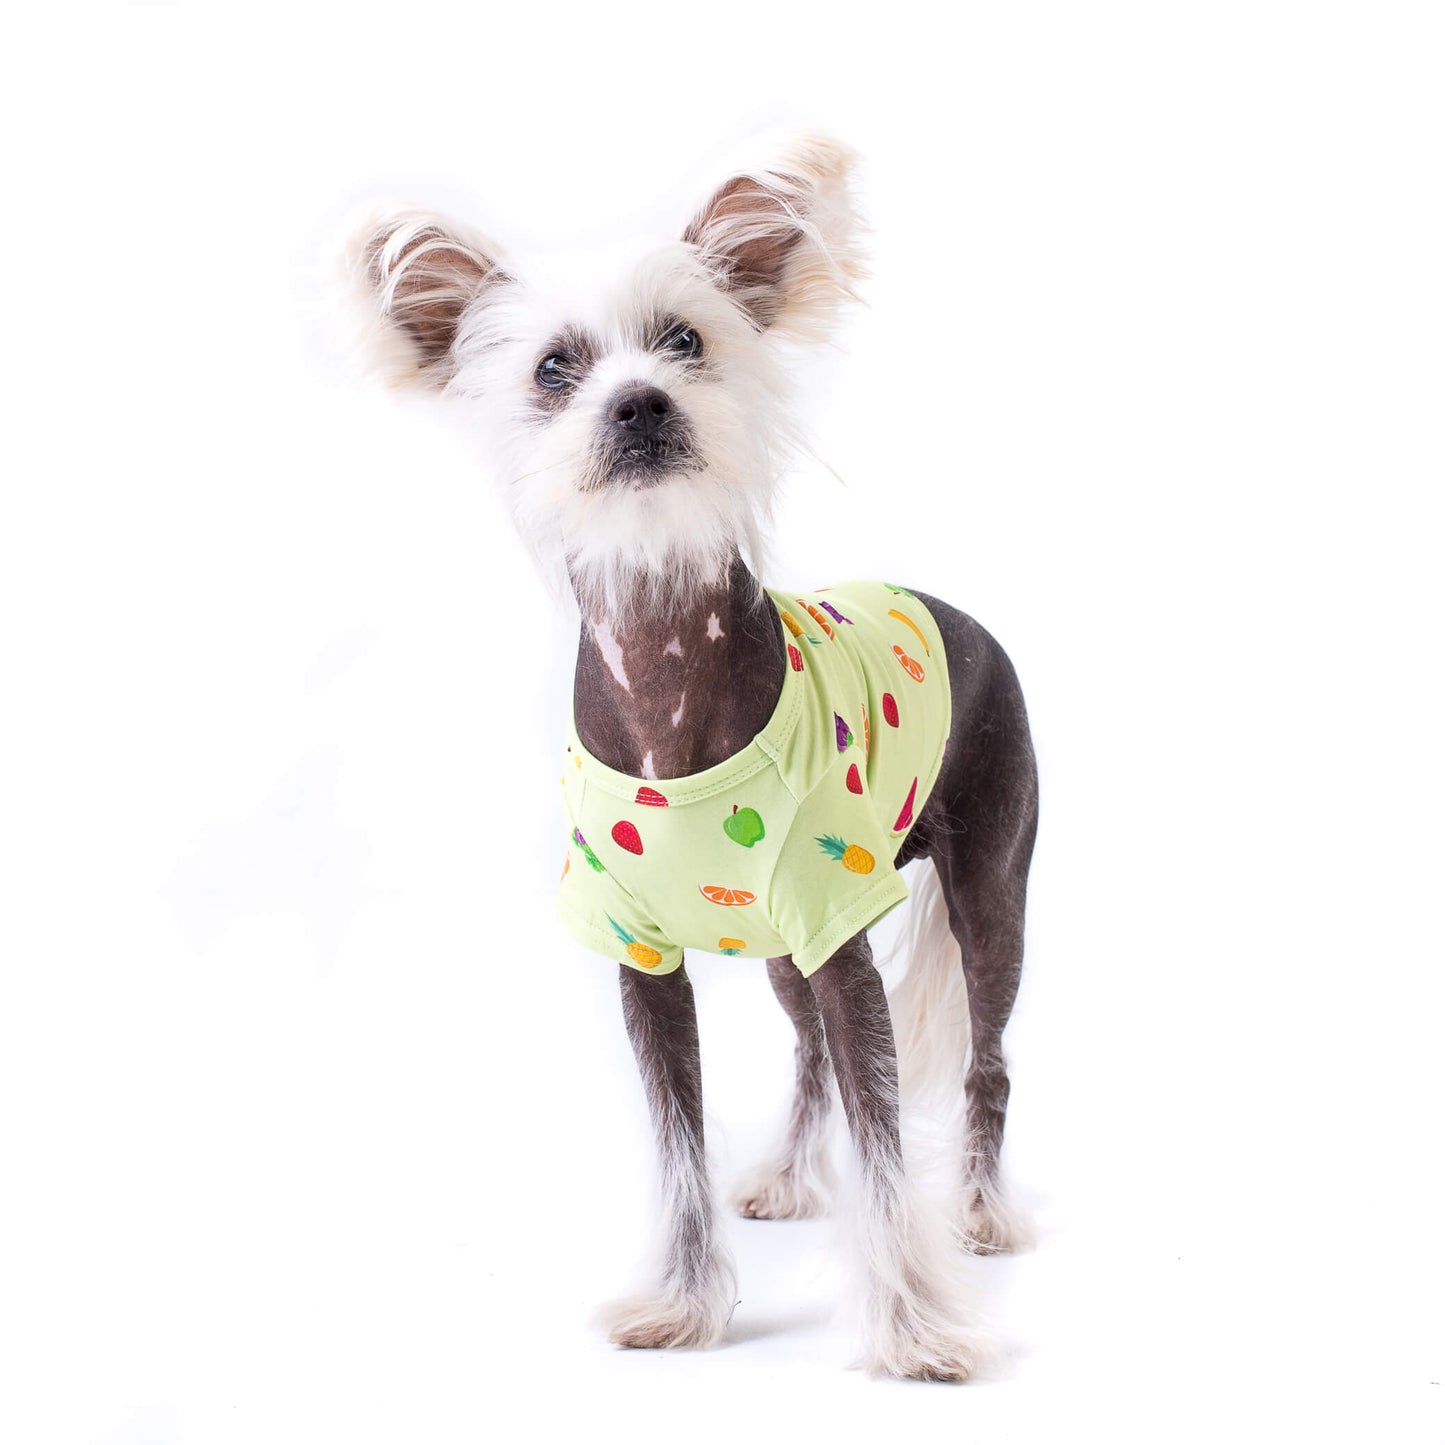 Adorable Chinese Crested dog wearing a vibrant green Feelin'Fruity shirt with a playful fruit print.